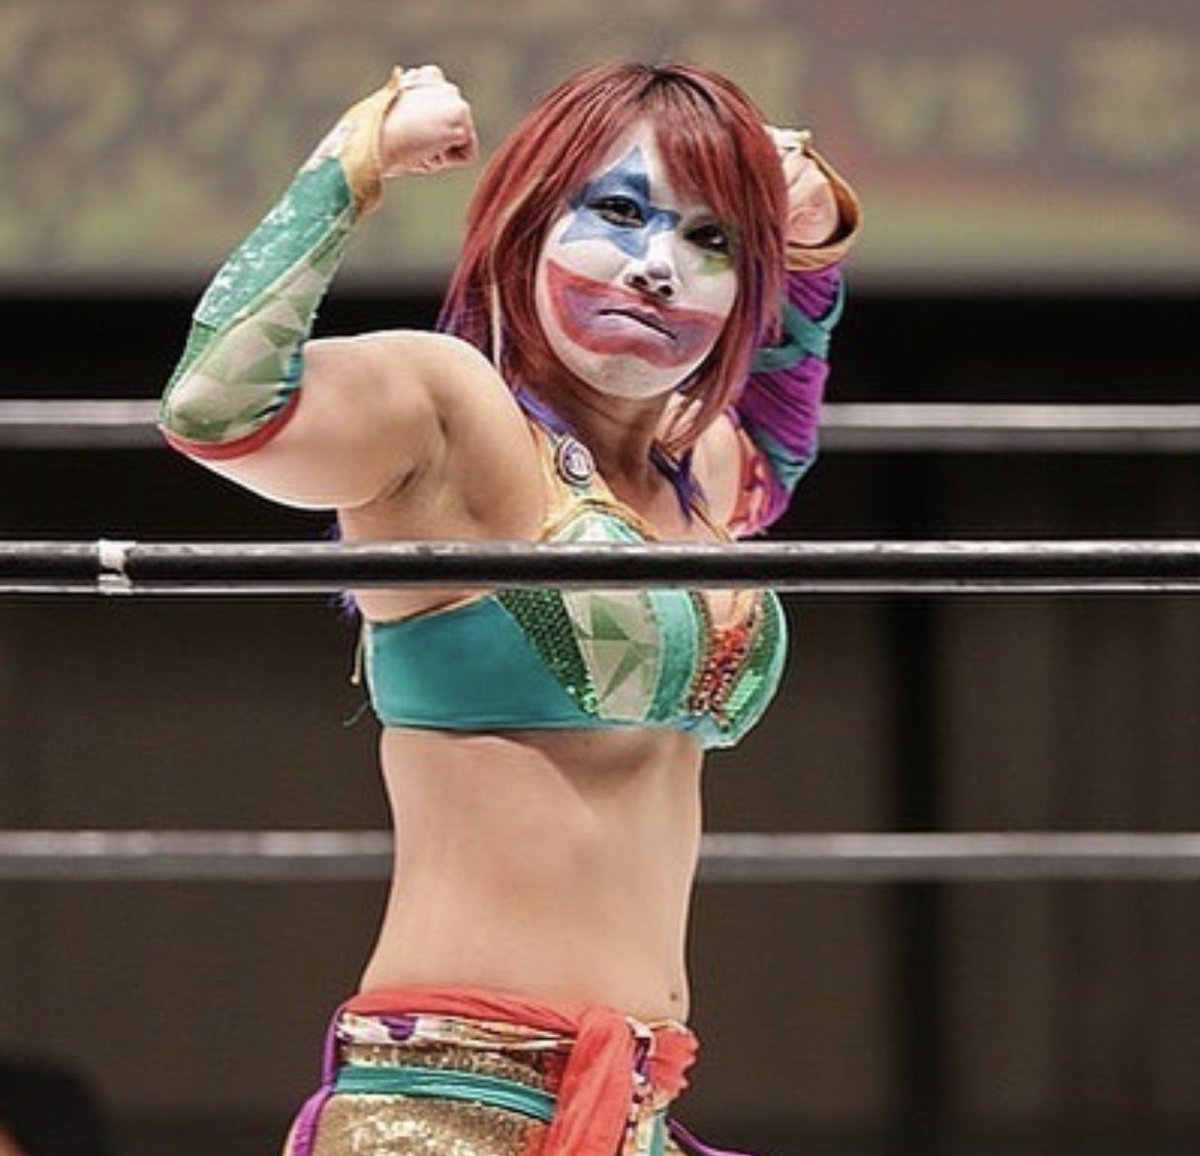 70+ Hot Pictures Of Asuka WWE Diva Unveil Her Fit Sexy Body 33. 